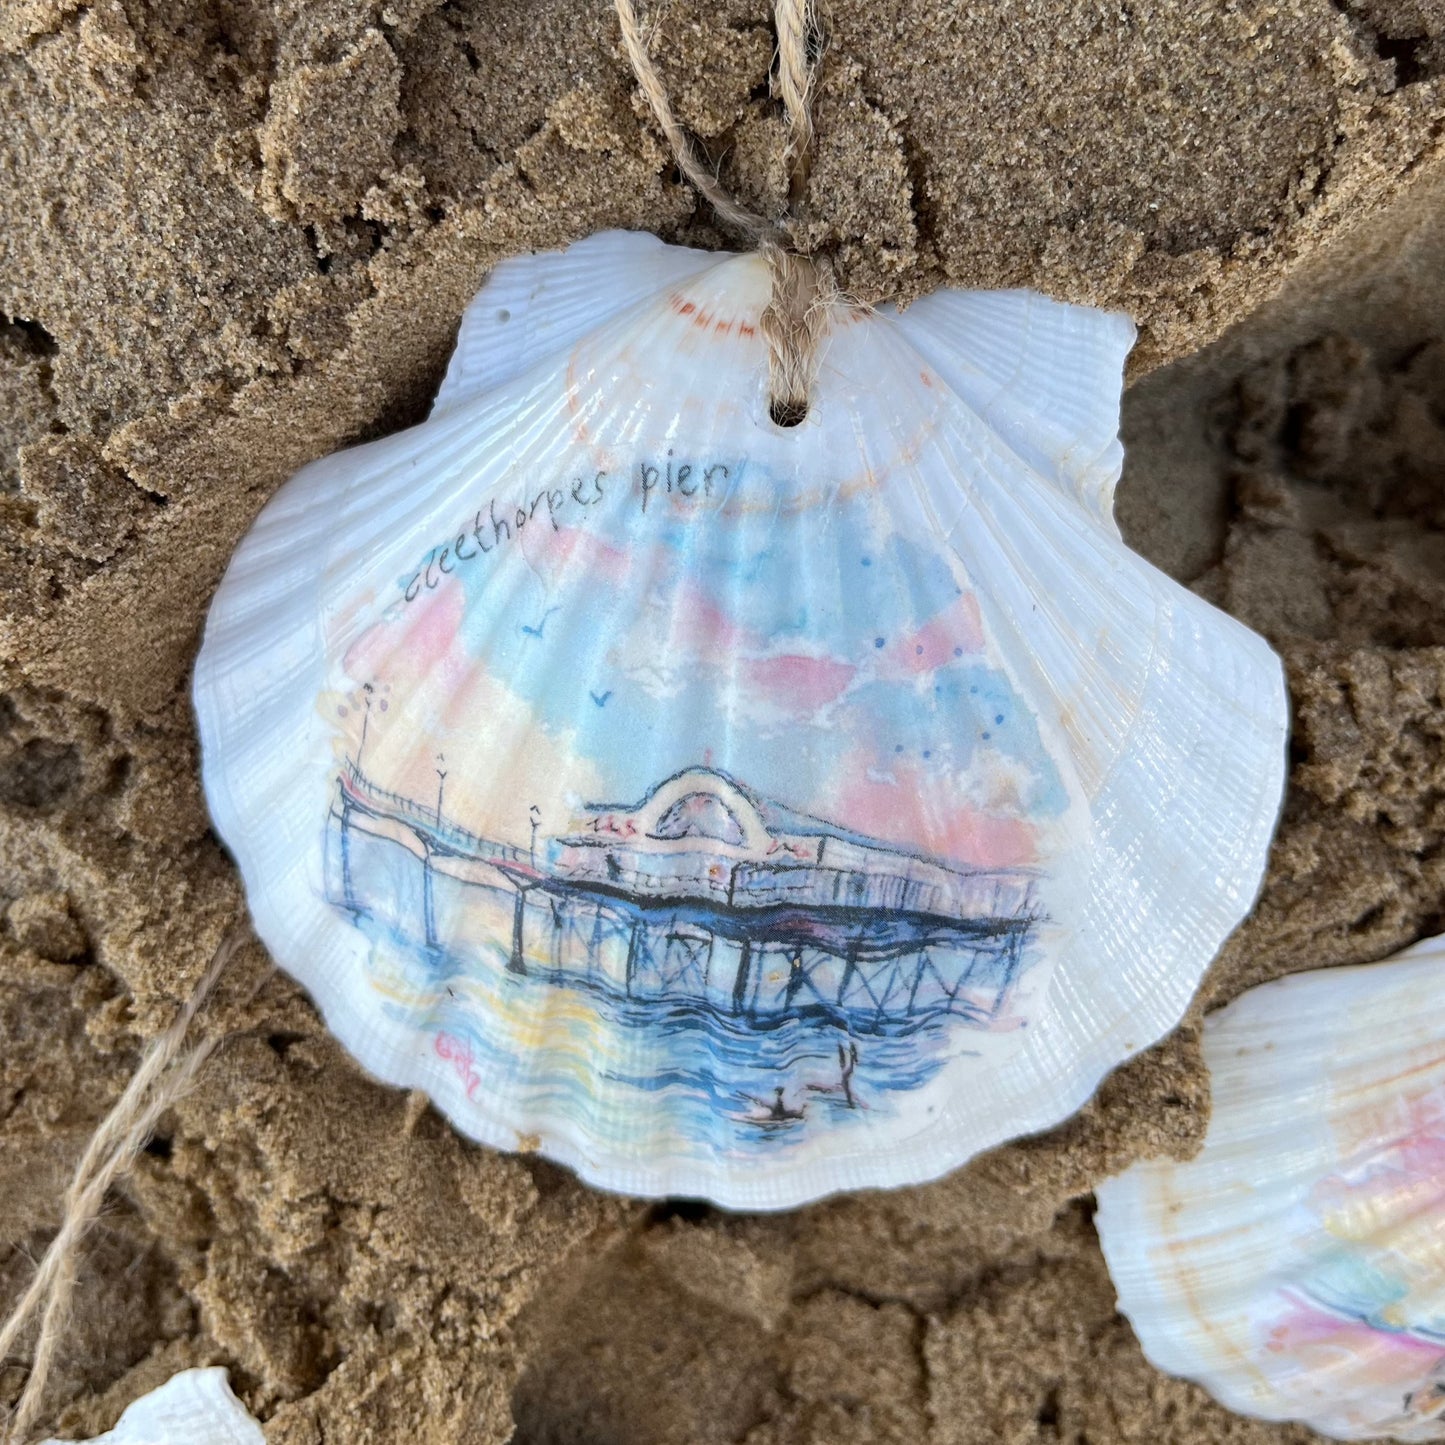 A decorative shell on Cleethorpes beach featuring a watercolour illustration of the Cleethorpes Pier by Eve Leoni Art. 